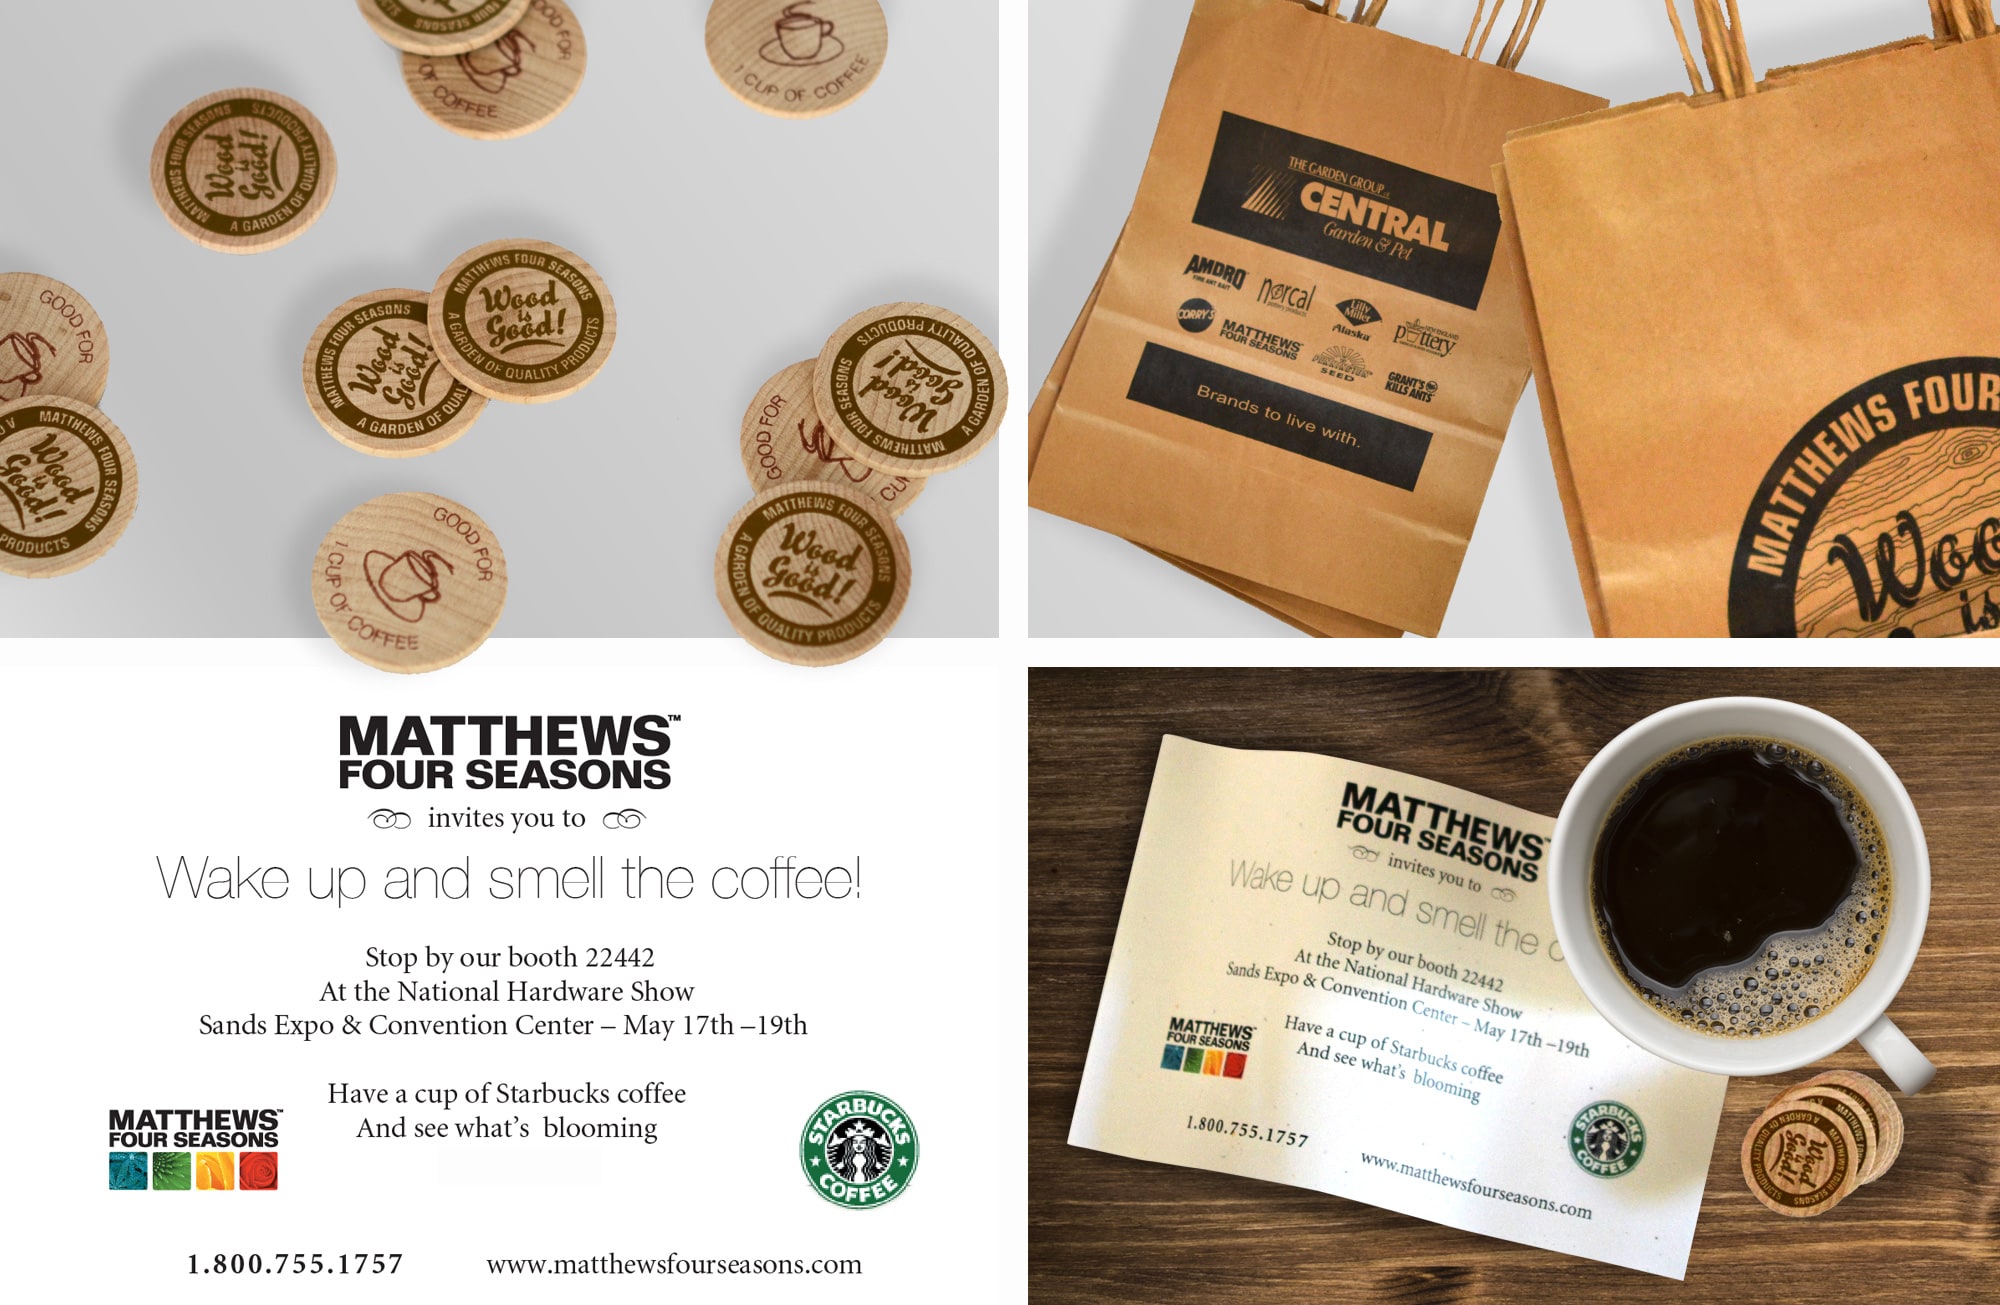  USA, Wood is Good Branding and Starbucks Campaign events 